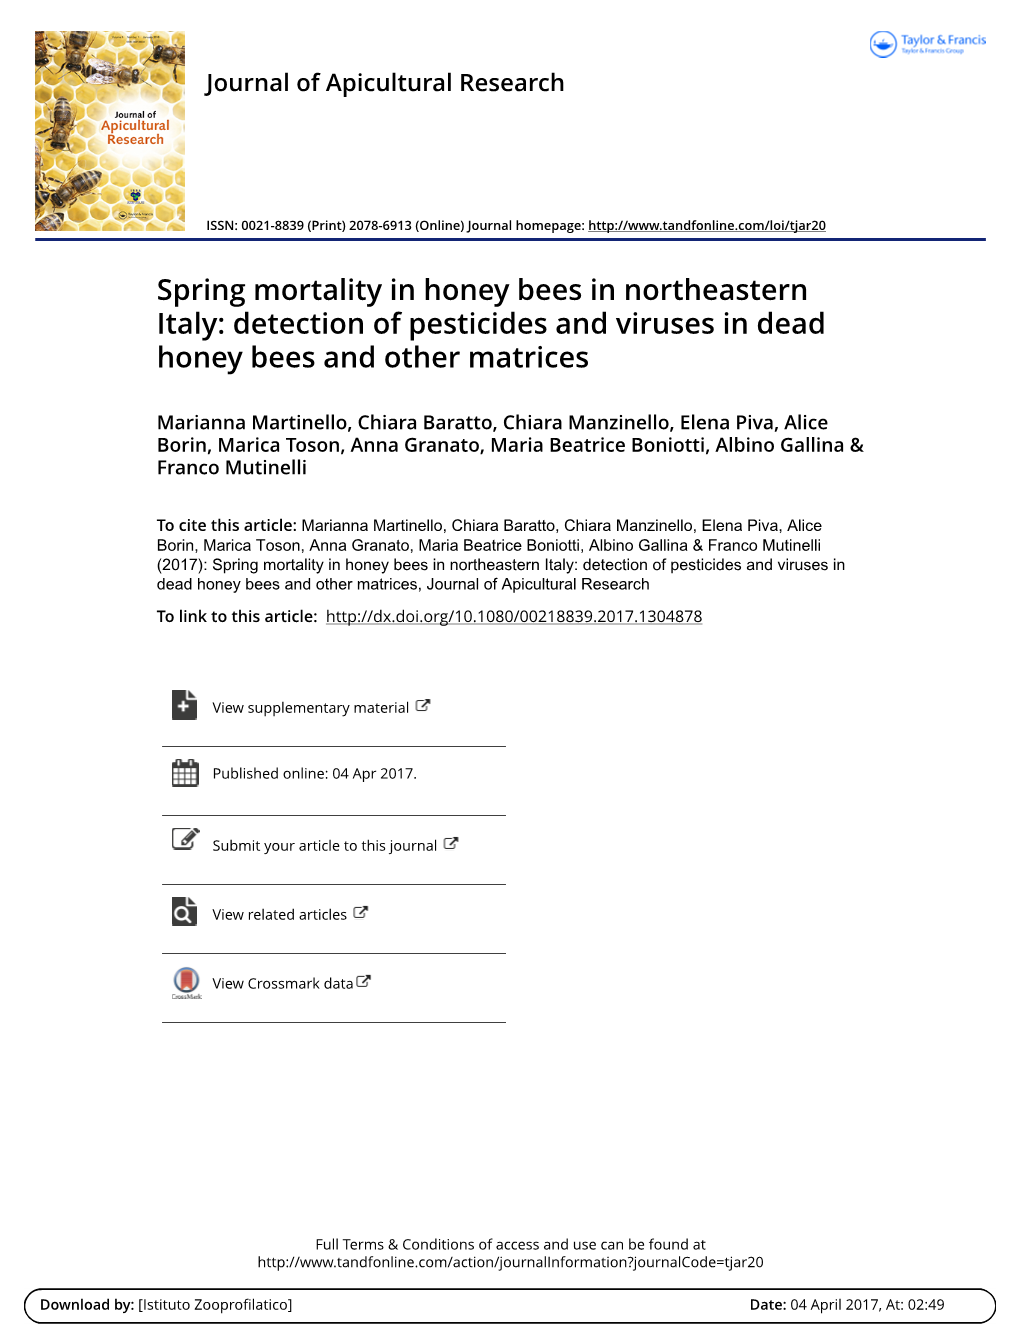 Detection of Pesticides and Viruses in Dead Honey Bees and Other Matrices